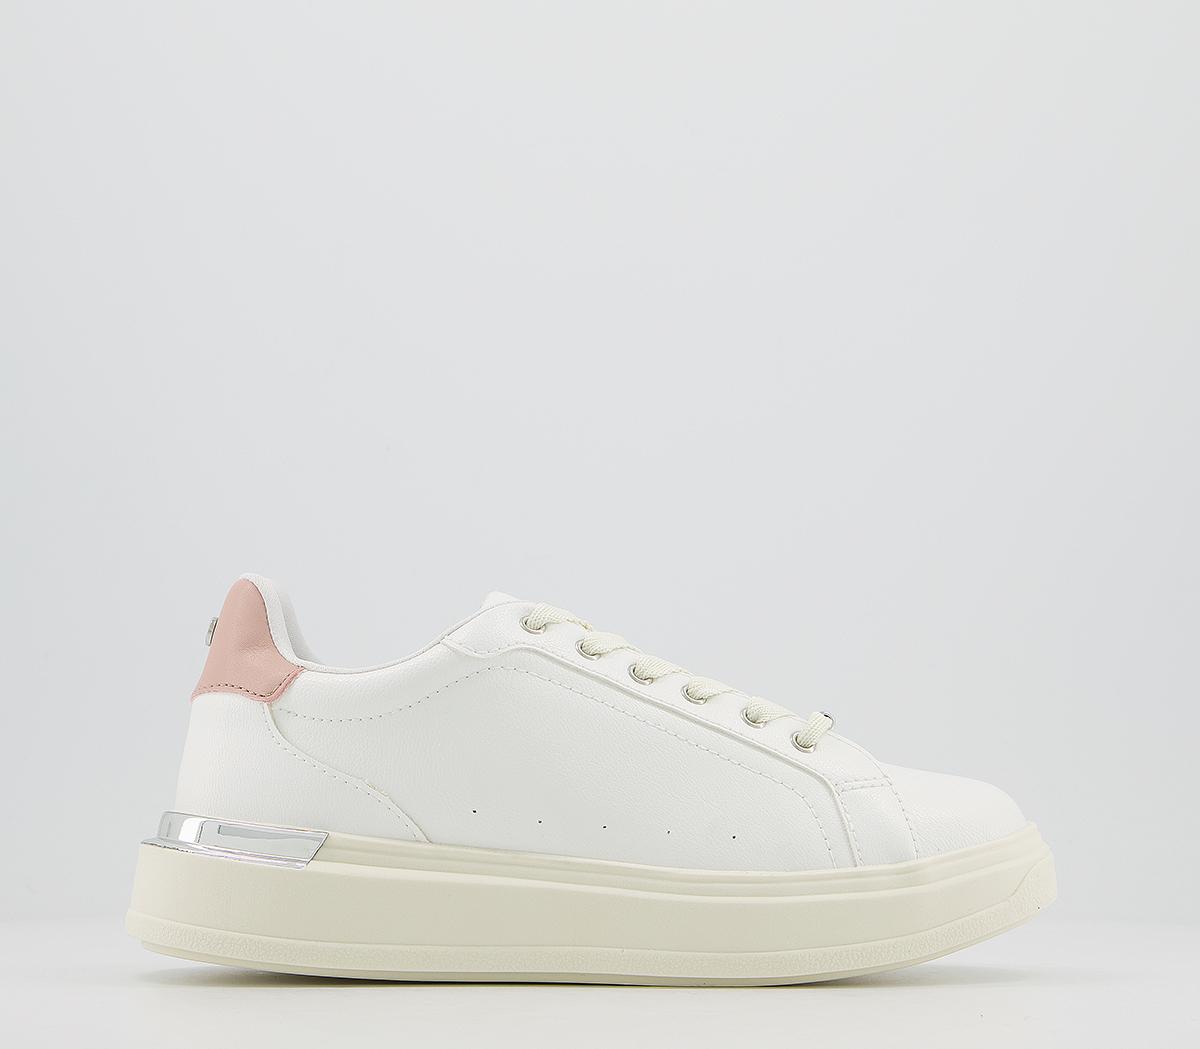 OFFICEFuse Lace Up TrainersOff White Nude Mix